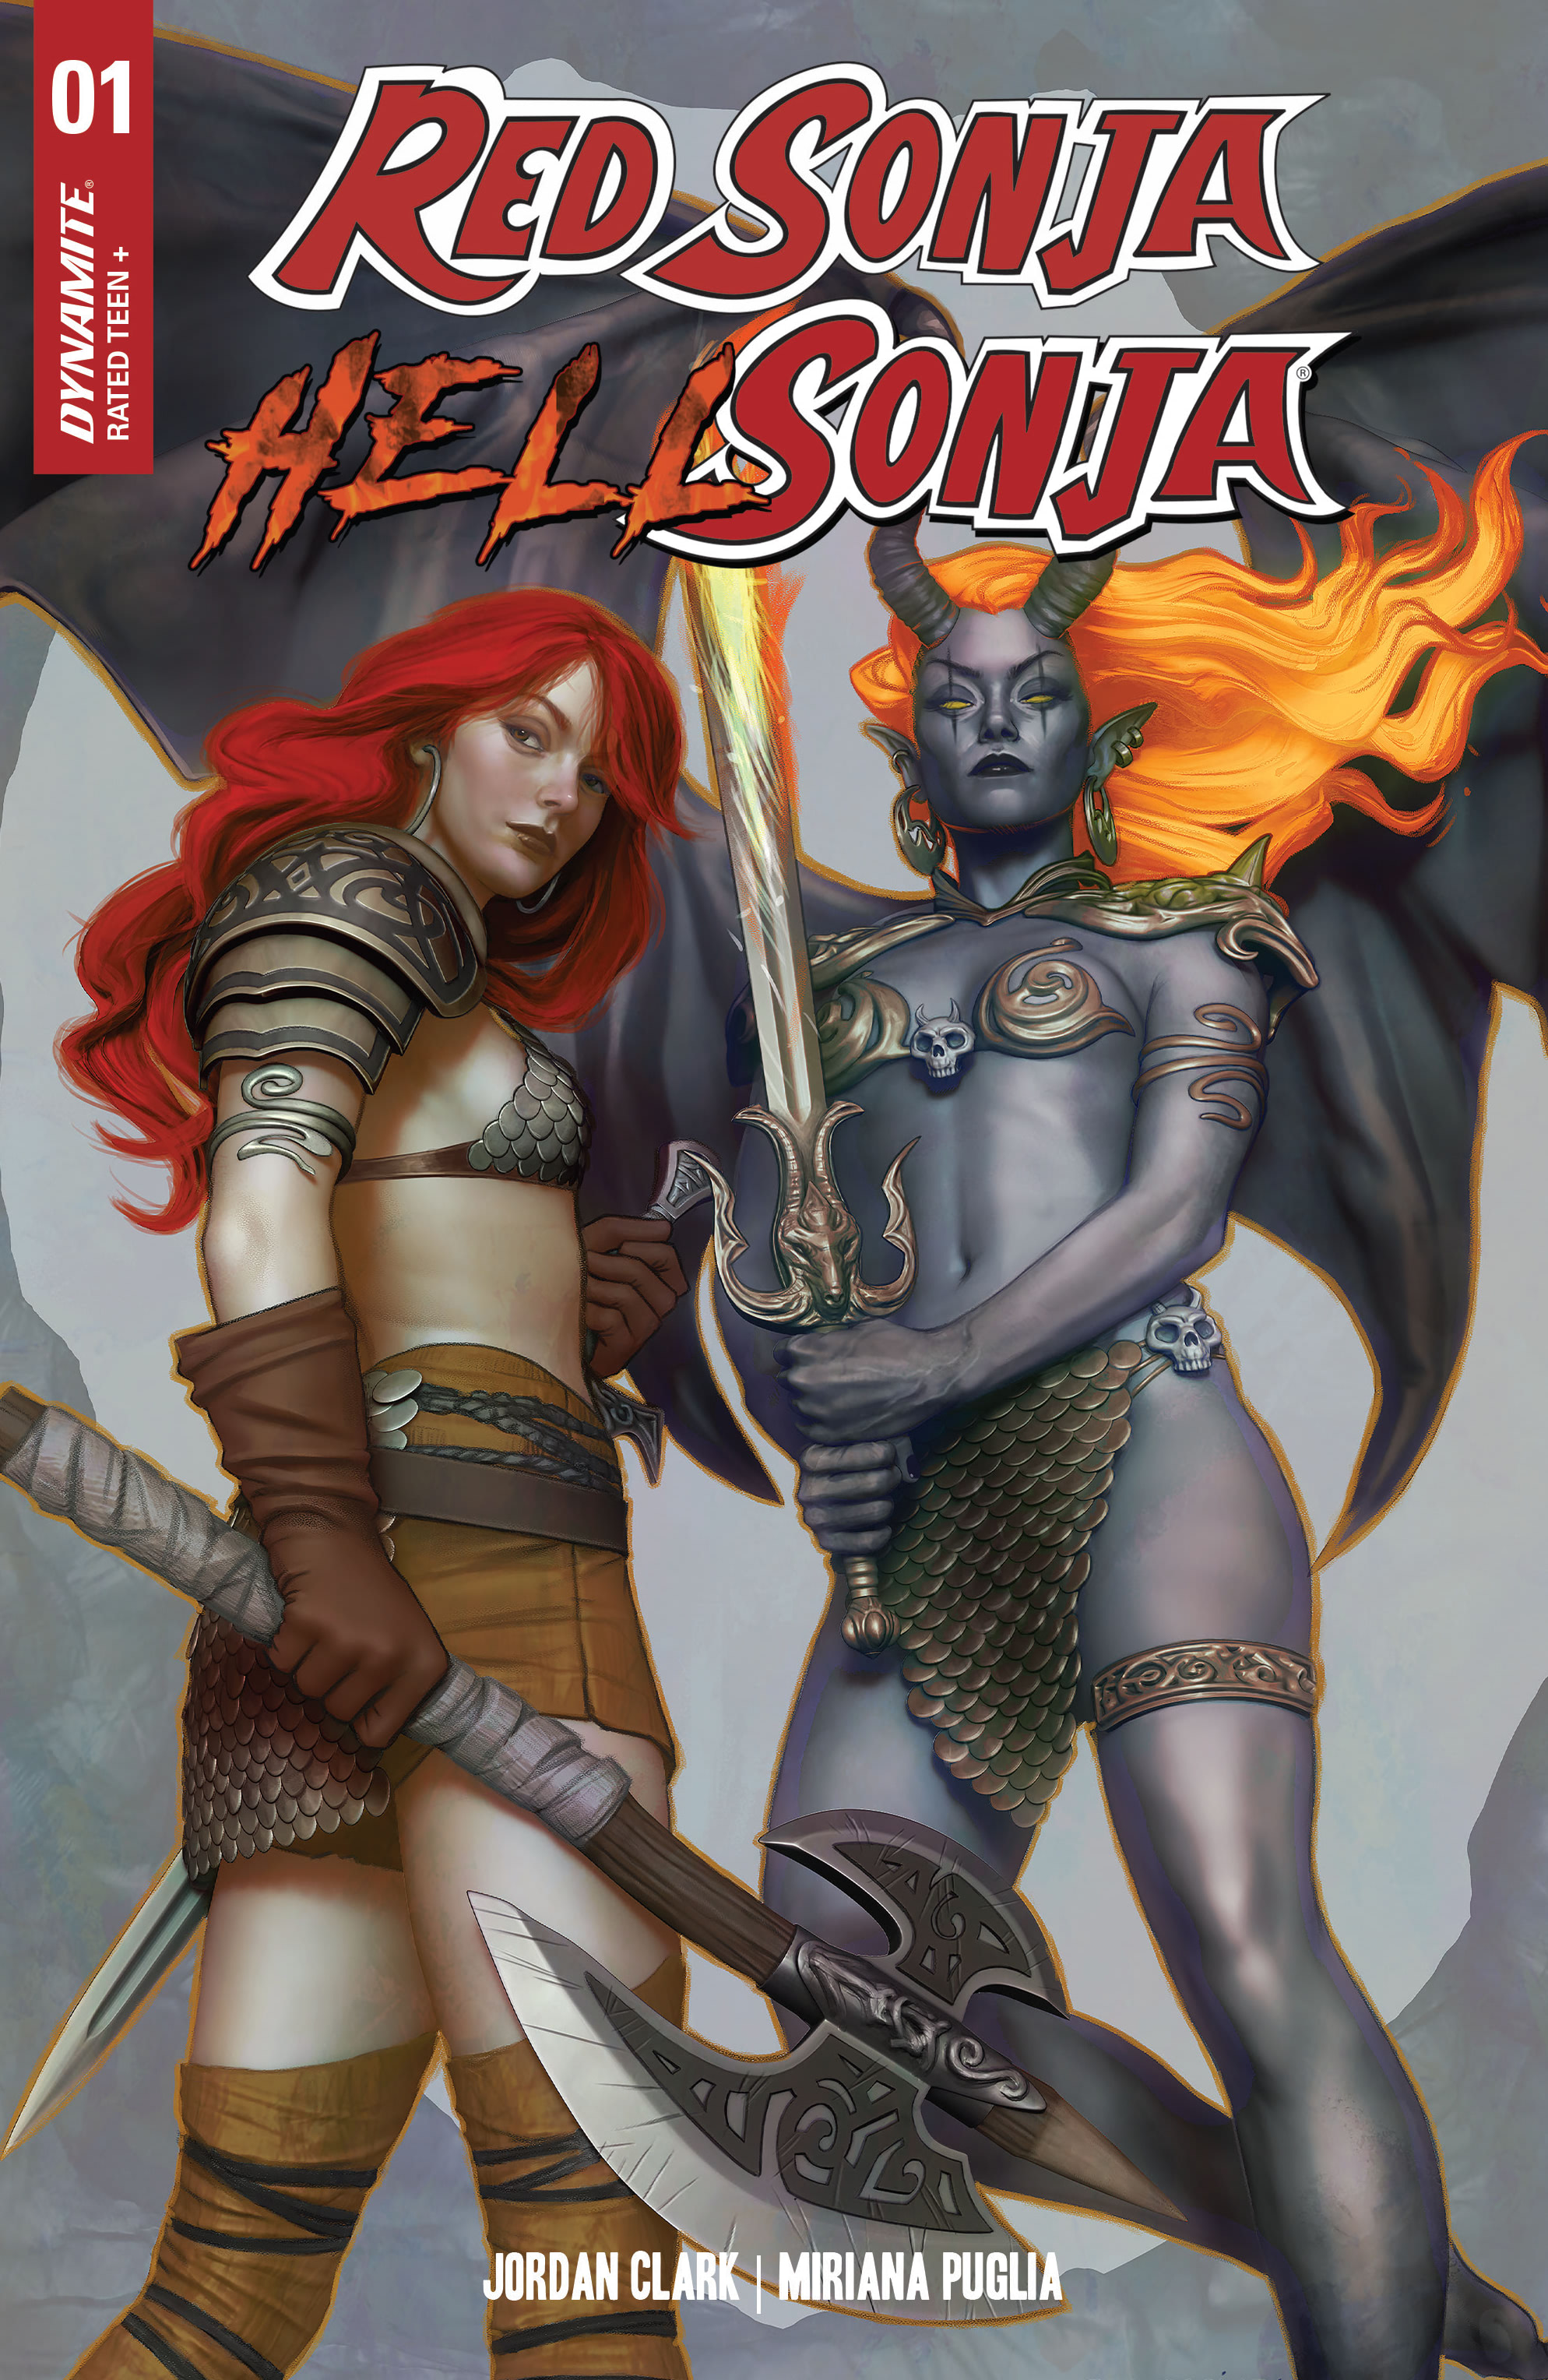 Read online Red Sonja / Hell Sonja comic -  Issue #1 - 4